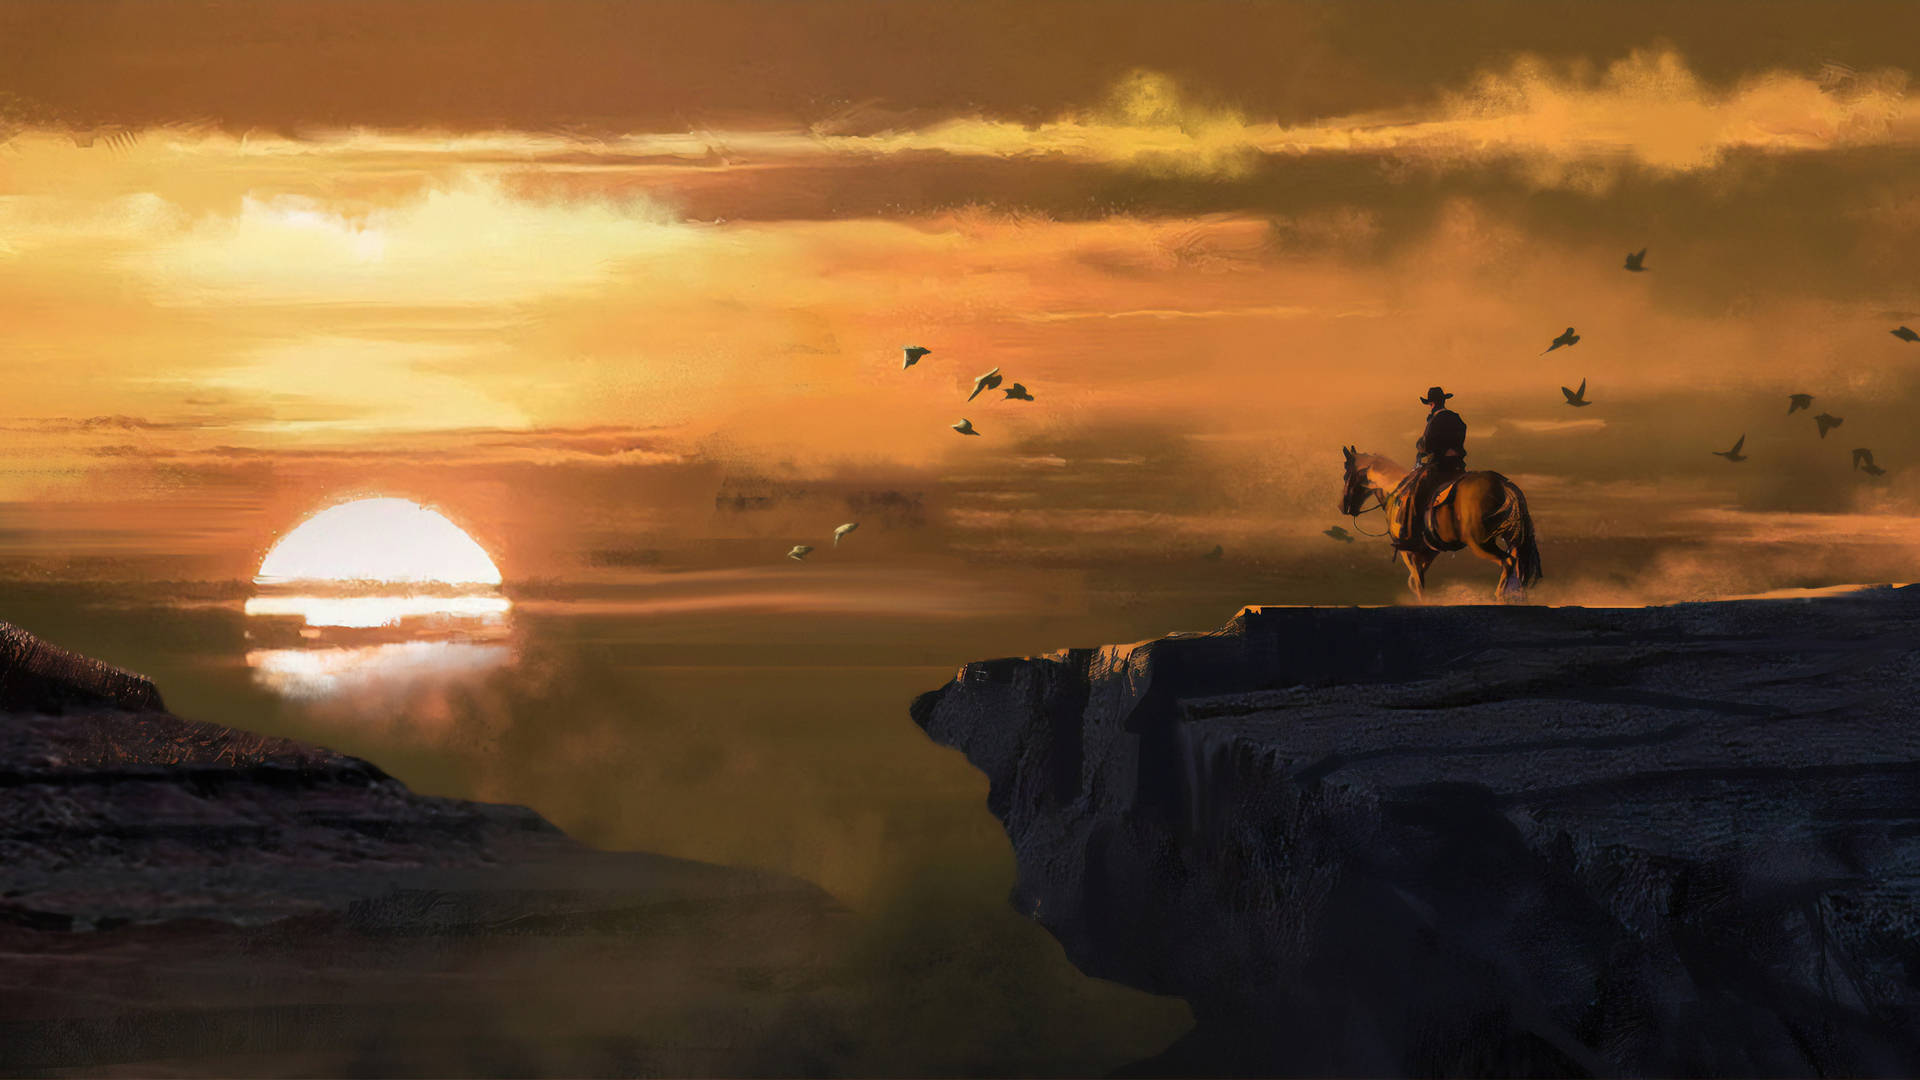 3840X2160 Rdr2 Wallpaper and Background